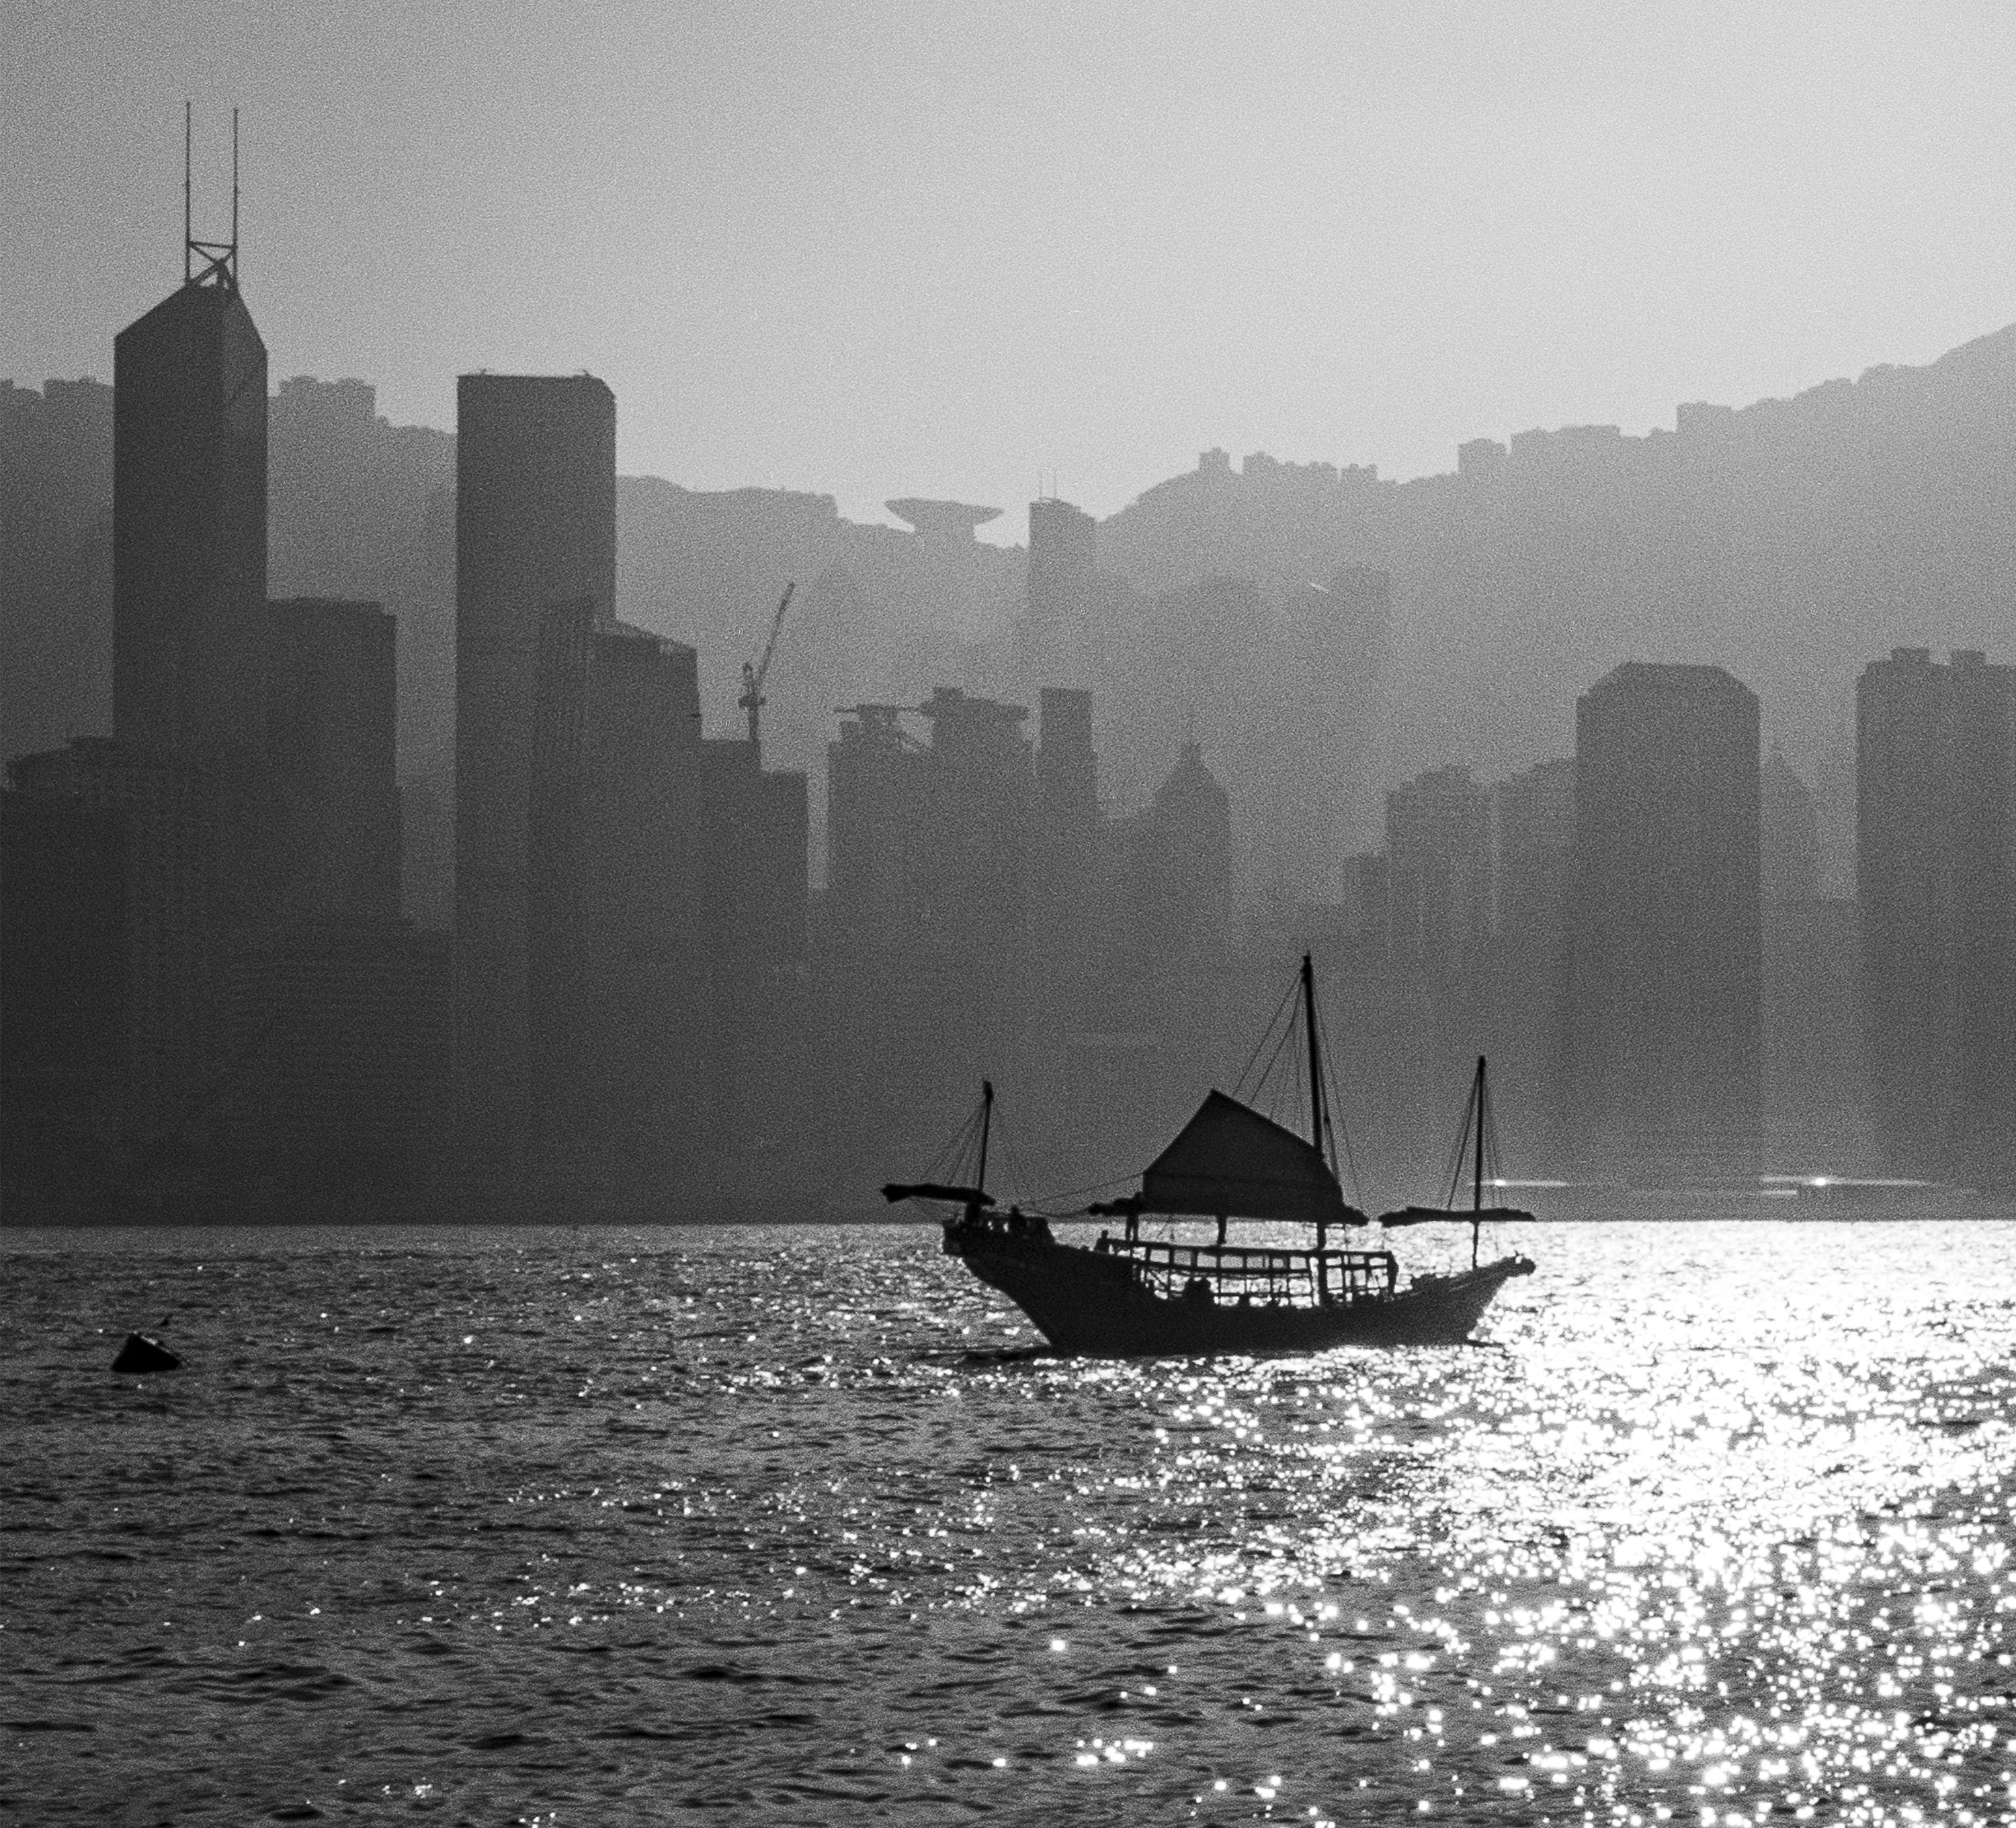 Hong Kong - black and white photograph - archival pigment print 17